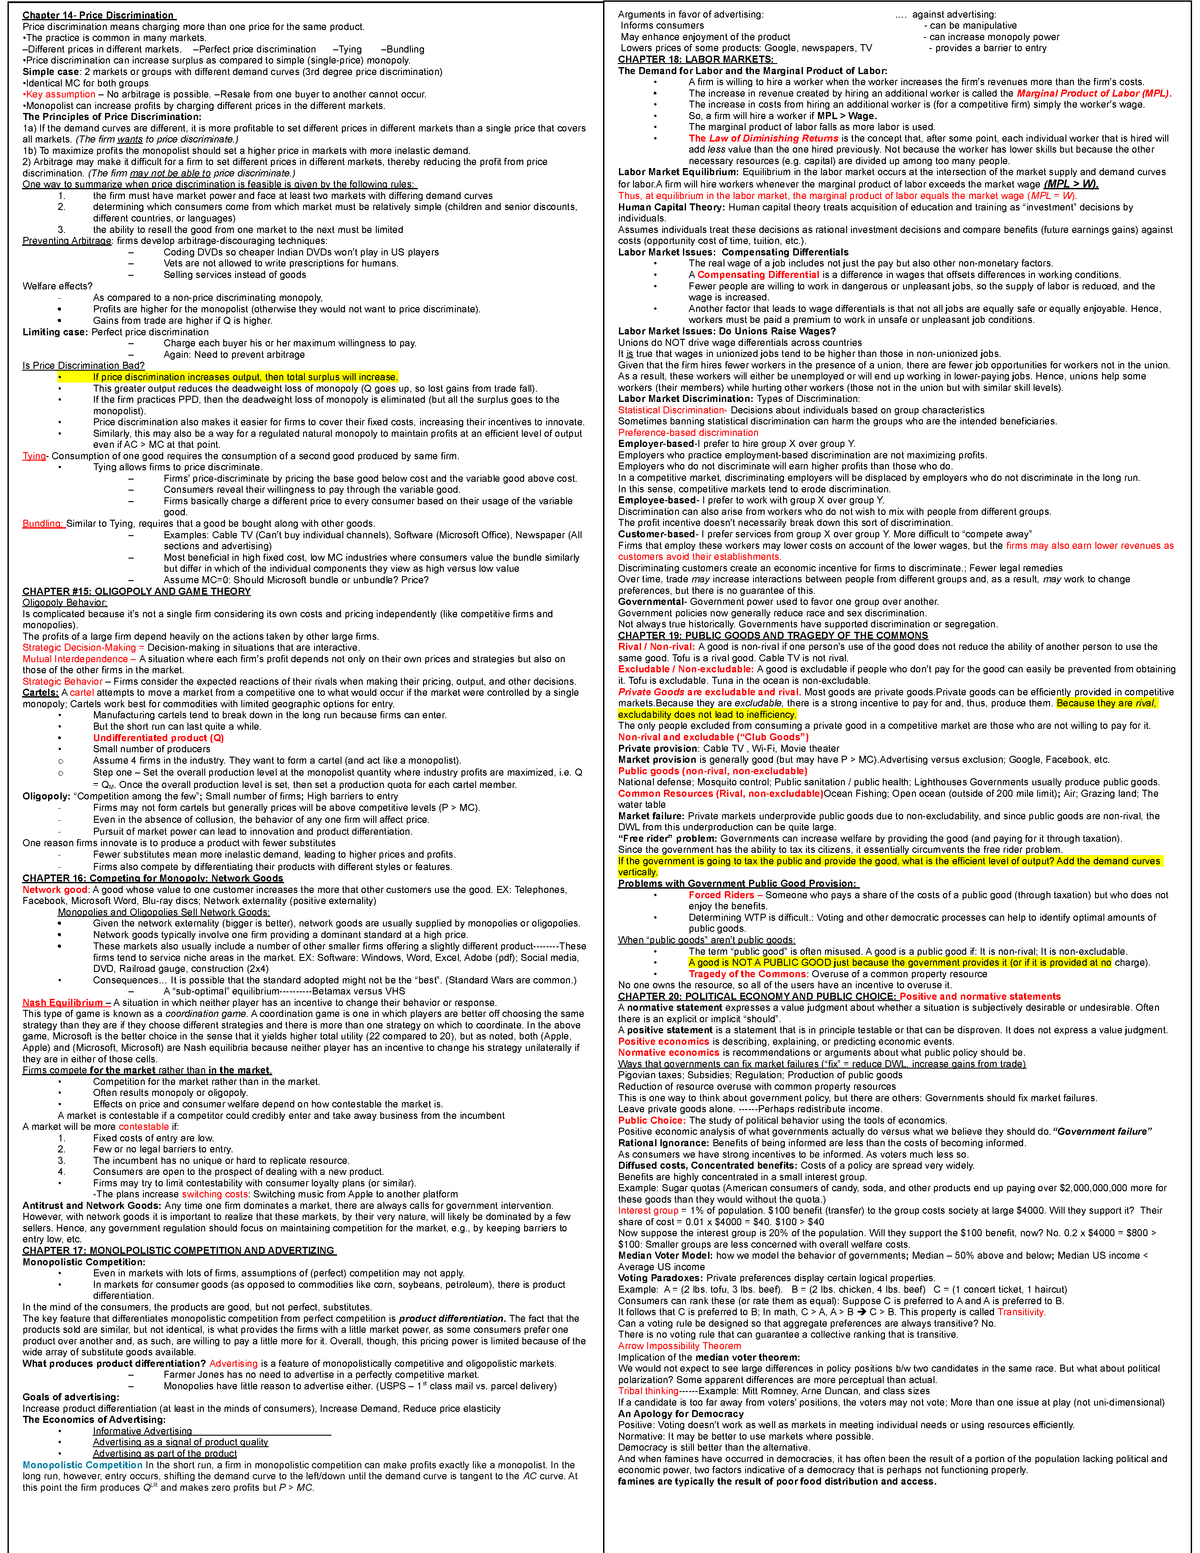 Economics Cheat Sheet by evelana - Download free from Cheatography